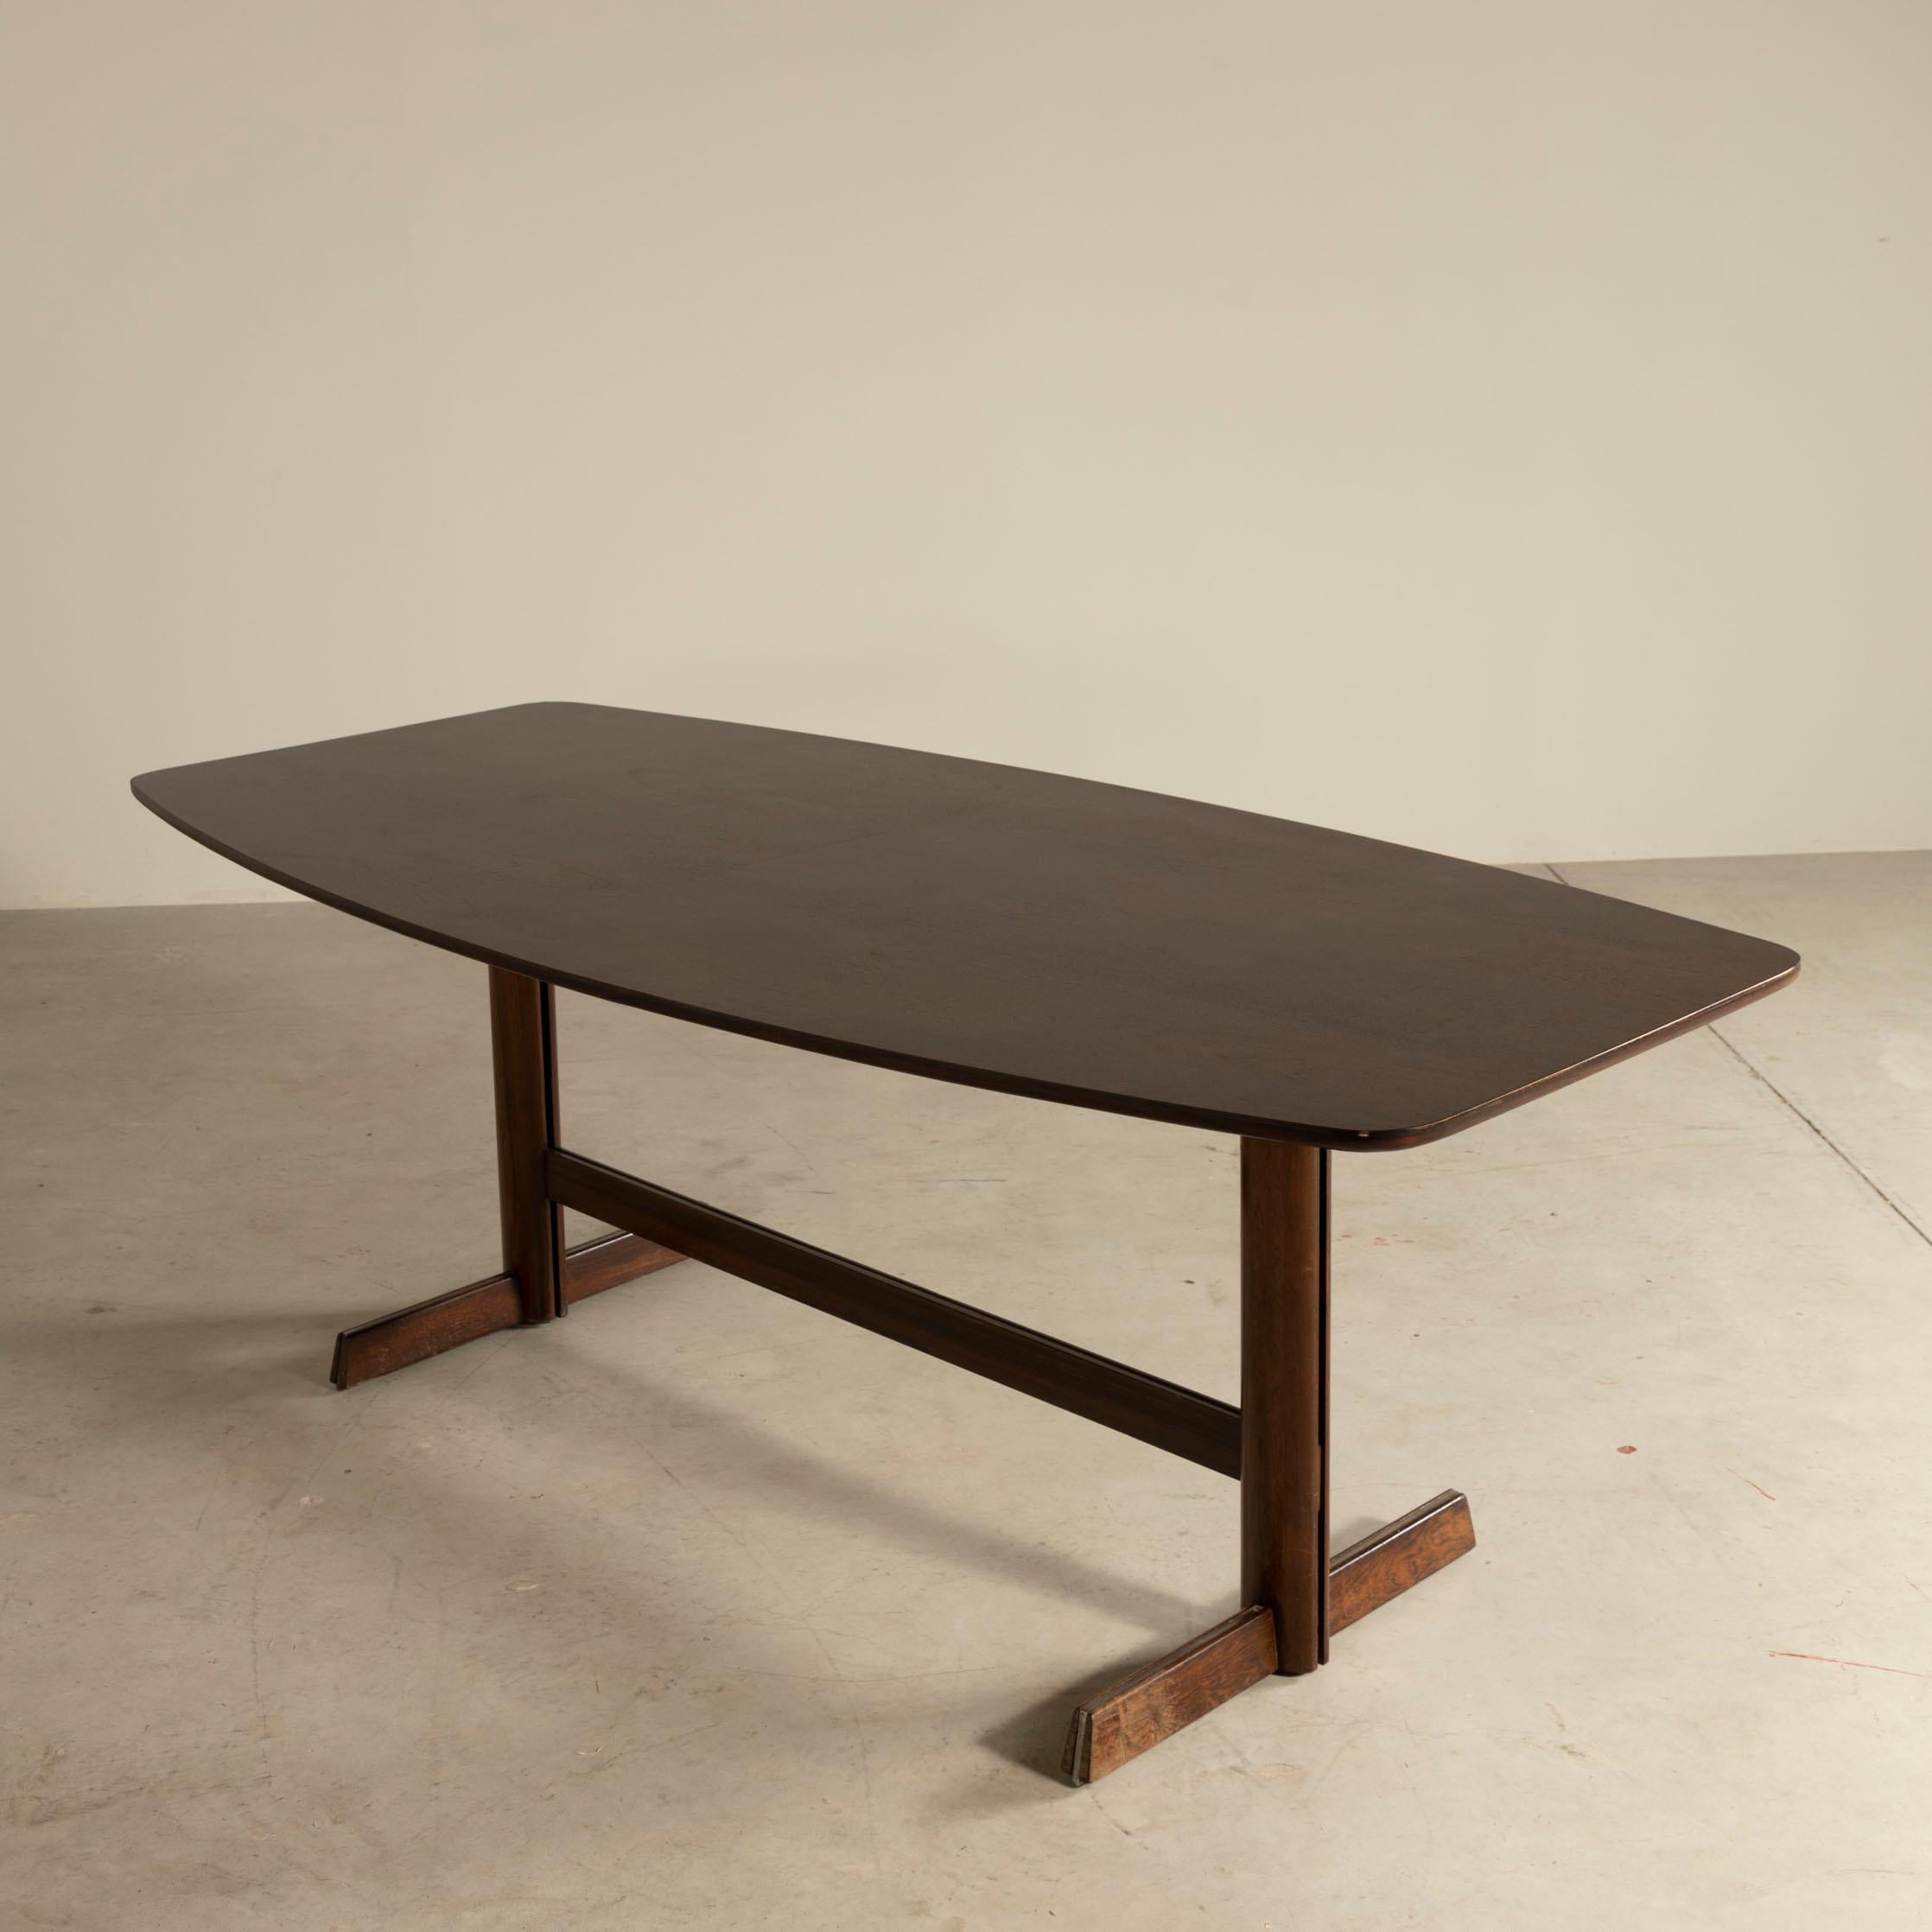 20th Century Rare Dining Table in Hardwood, by L'atelier, Brazilian Mid-Century Modern For Sale